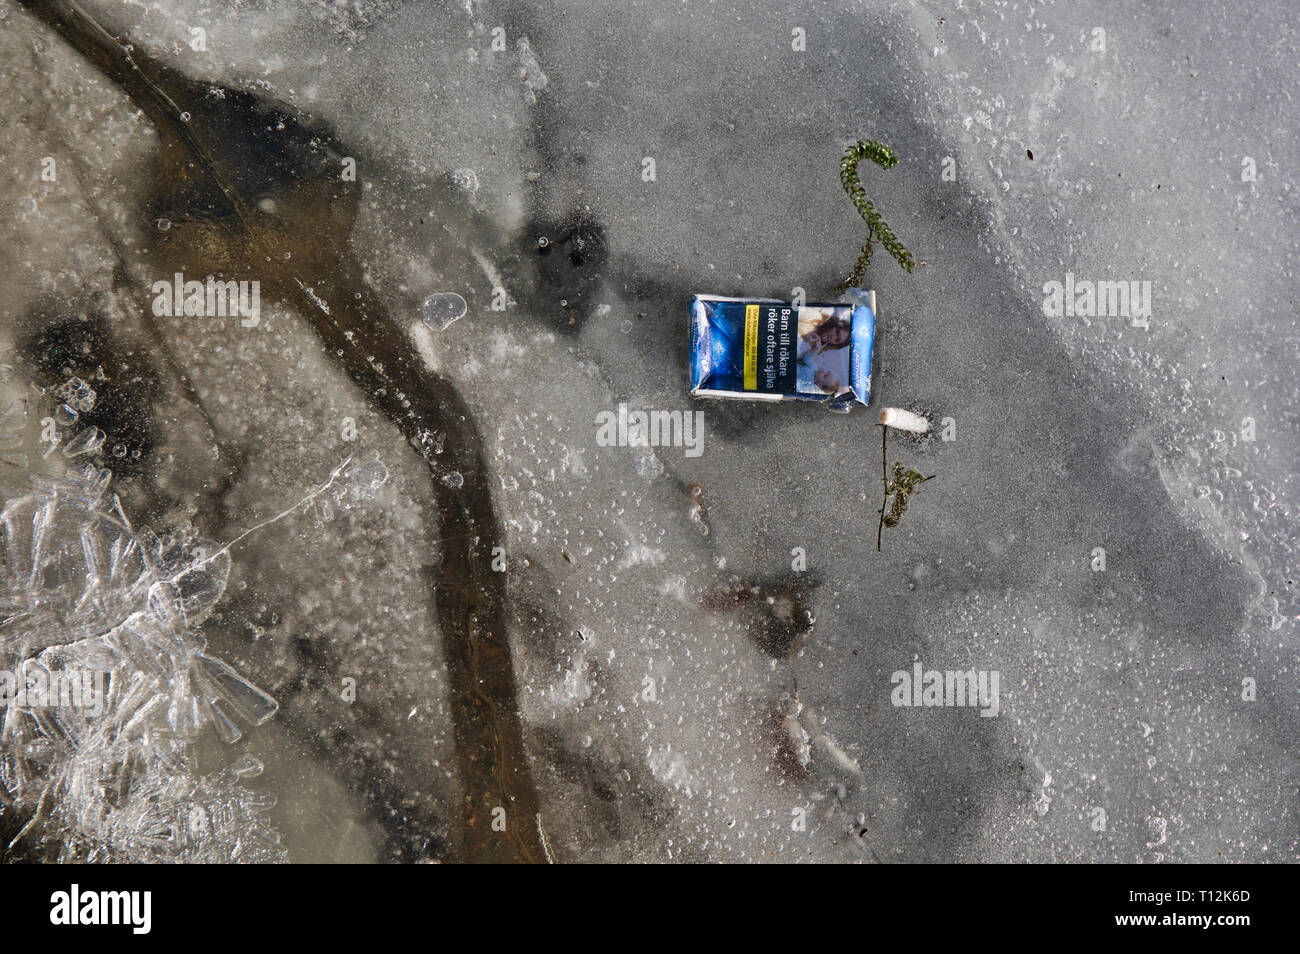 Discarded cigarette pack frozen in ice of lake, Sweden, Scandinavia Stock Photo